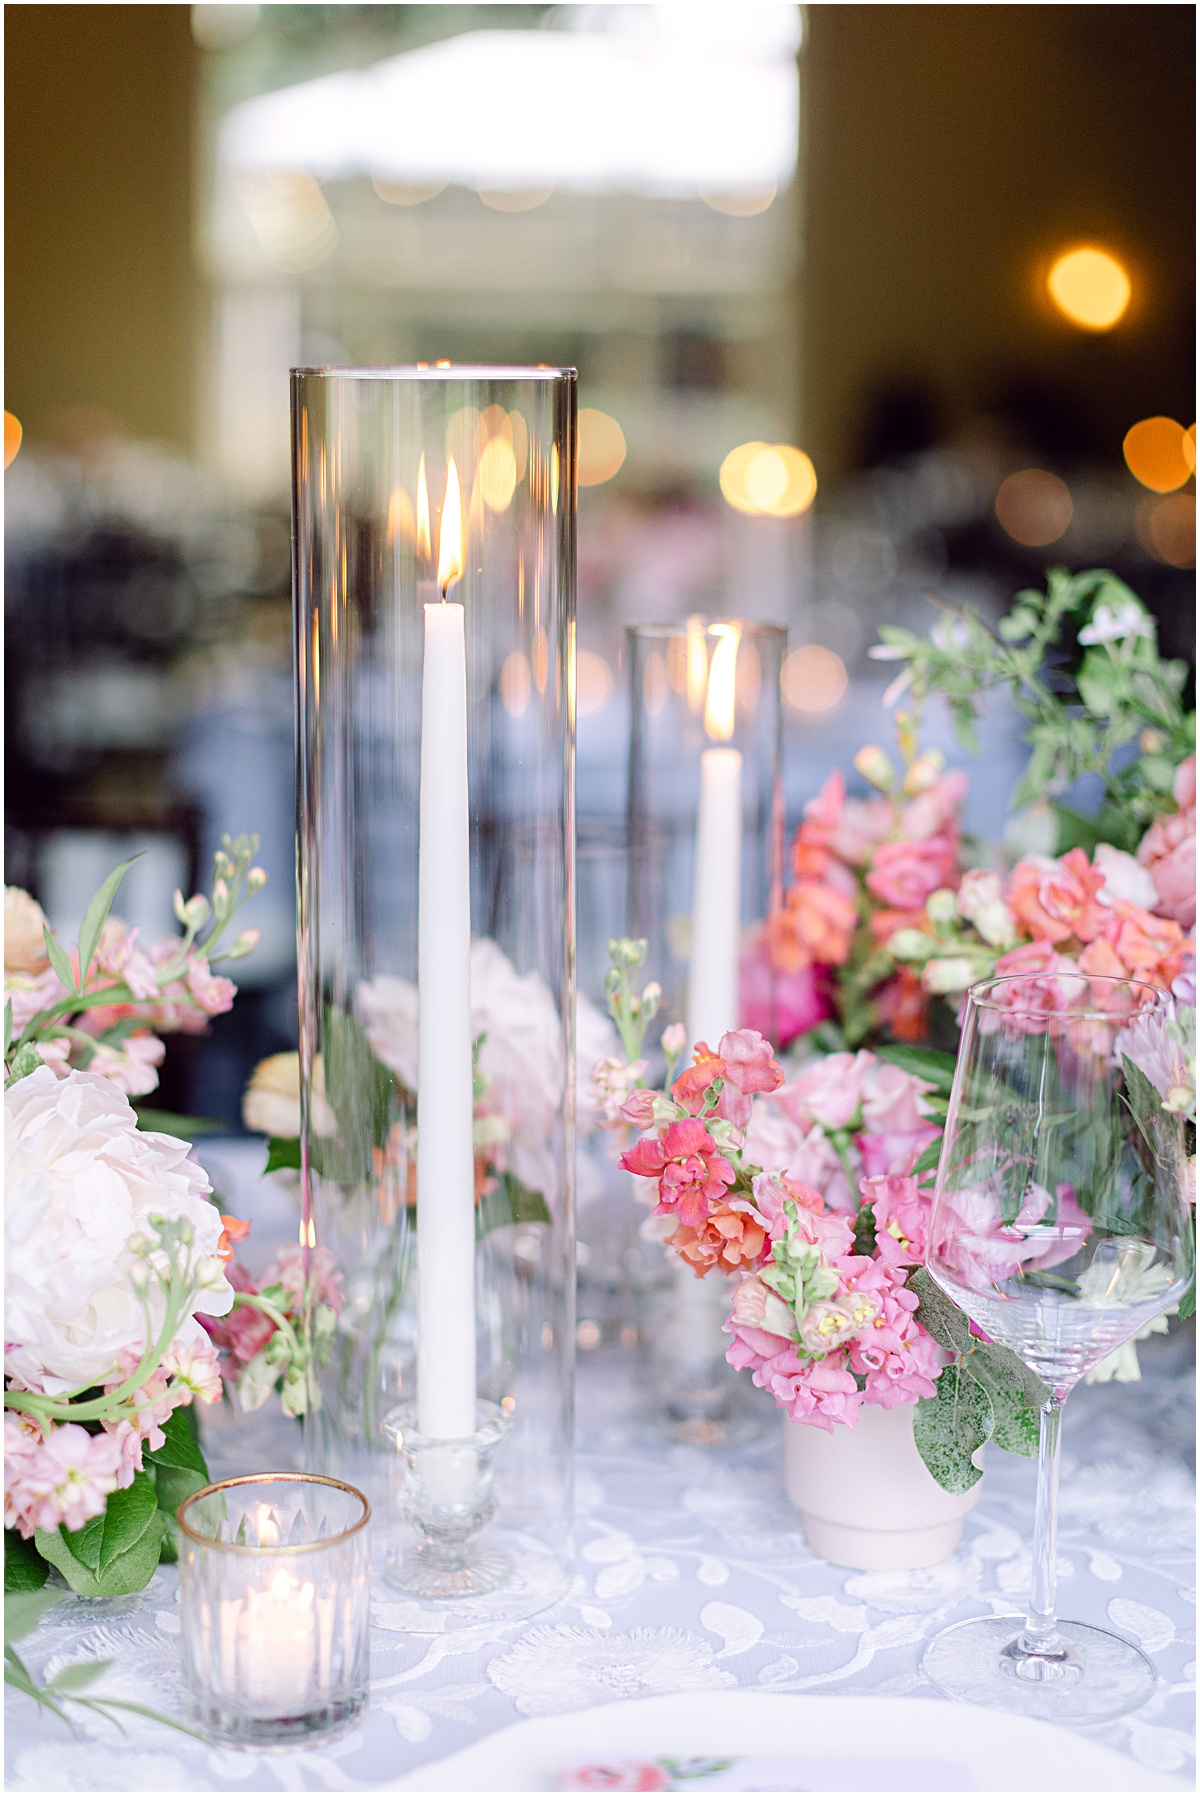 Reception florals by Holly Chapple. Joyful summer wedding at the Inn at Willow Grove by Sarah Bradshaw. Planning by Kelley Cannon Events.